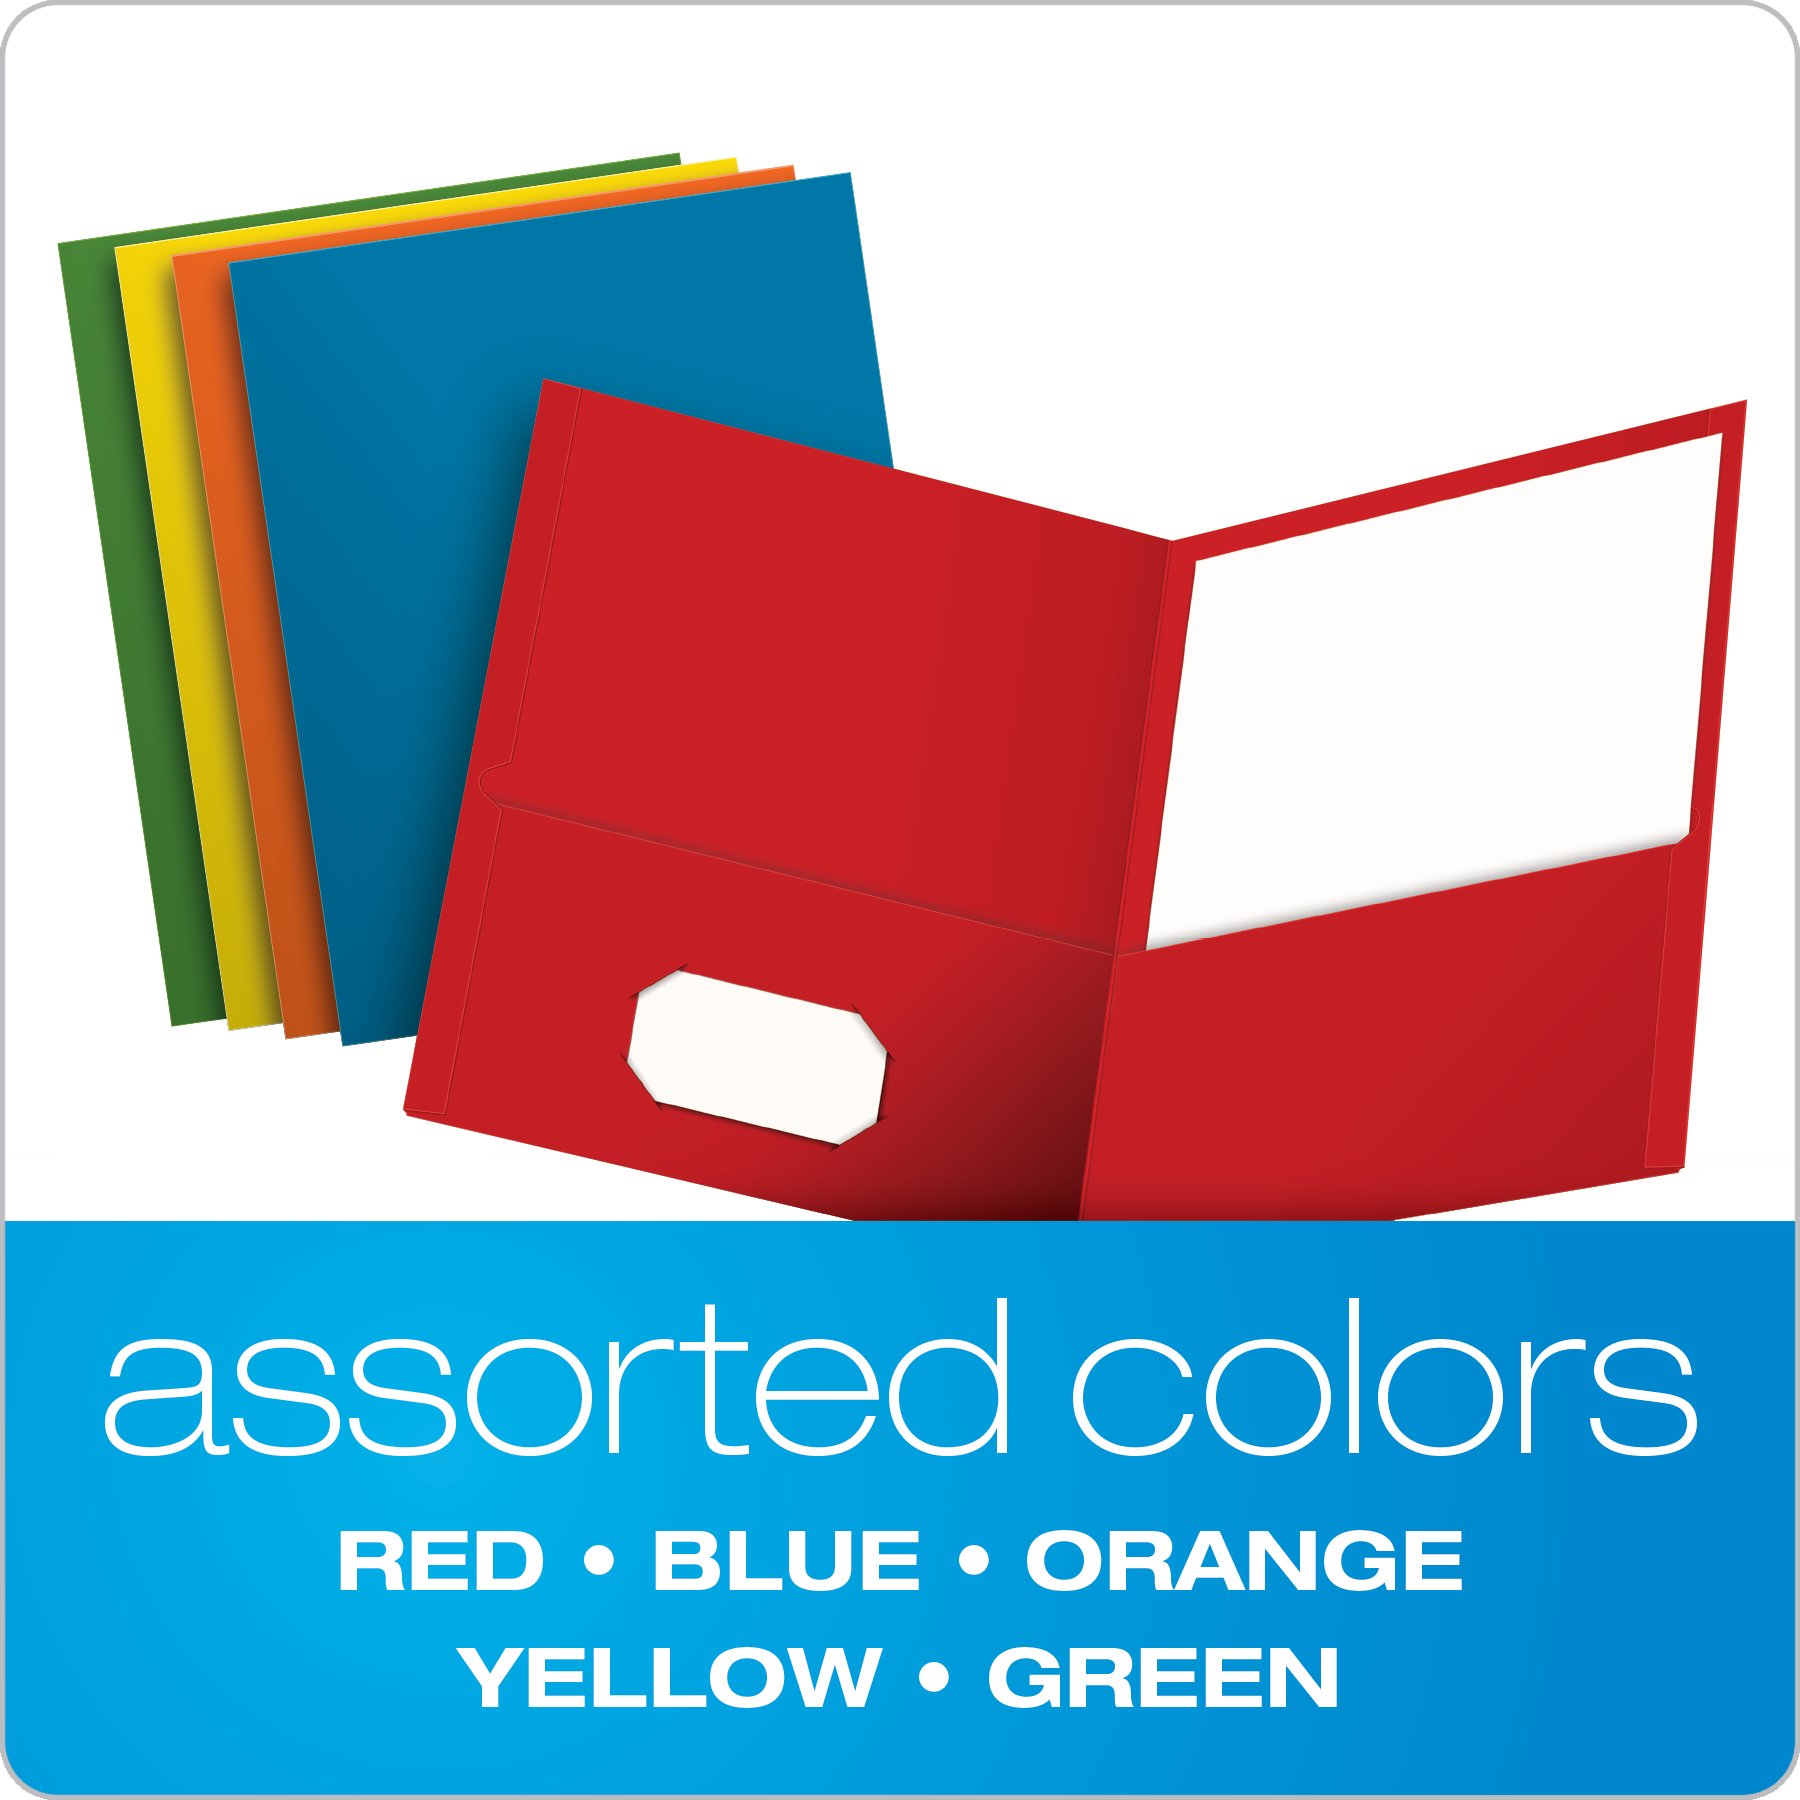 Oxford 2 Pocket Folders, Textured Paper, Assorted Colors (Light Blue, Red, Yellow, Orange, Green), Letter Size, 50 Per Box (67613)